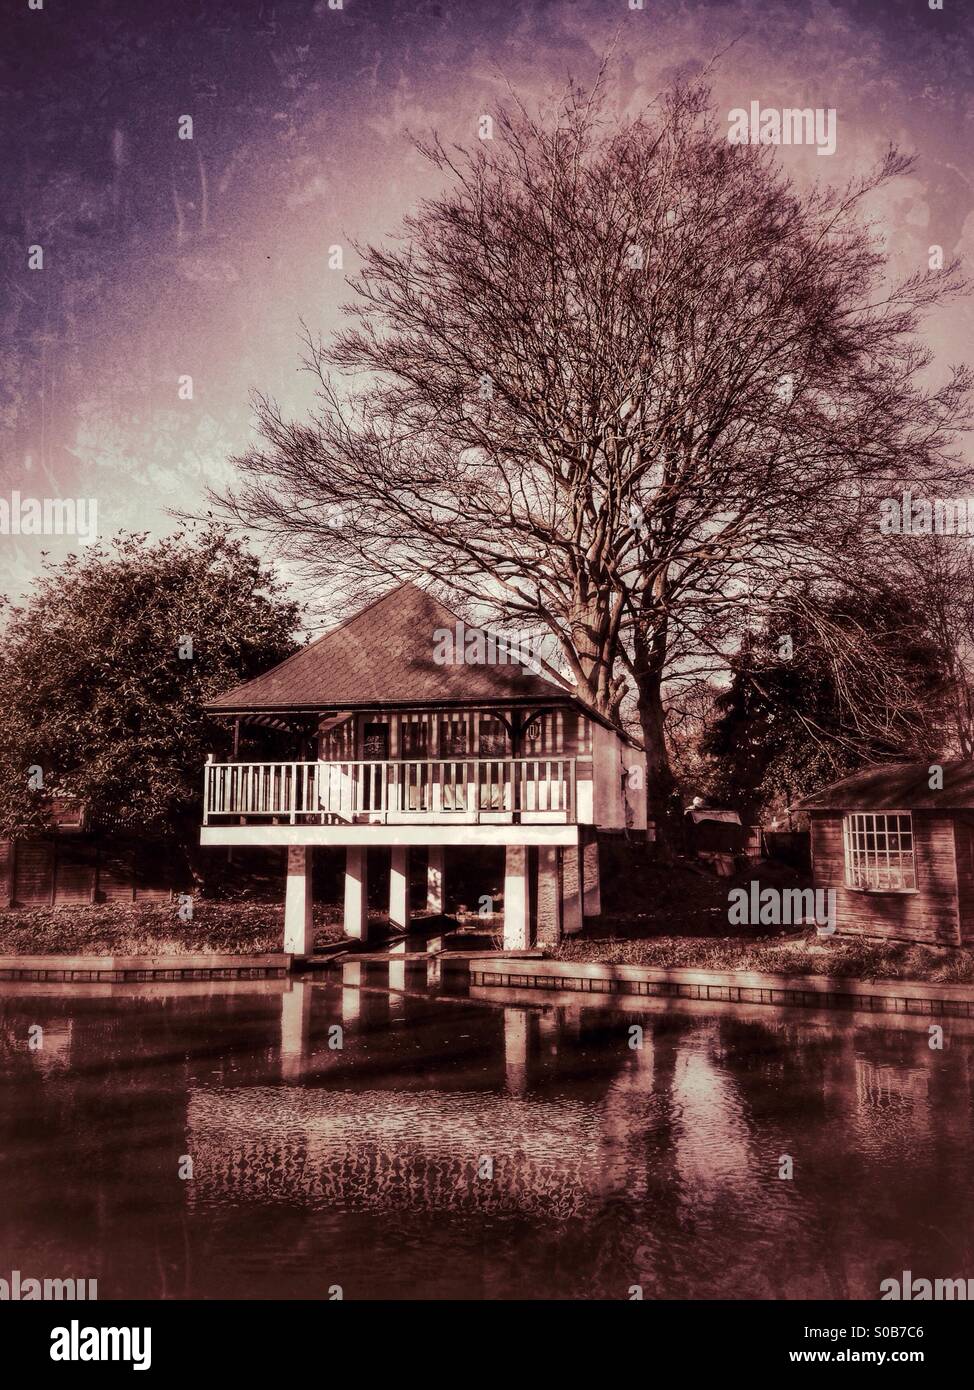 Chalet on stilts. River Wey, Guildford, Surrey, England. Stock Photo